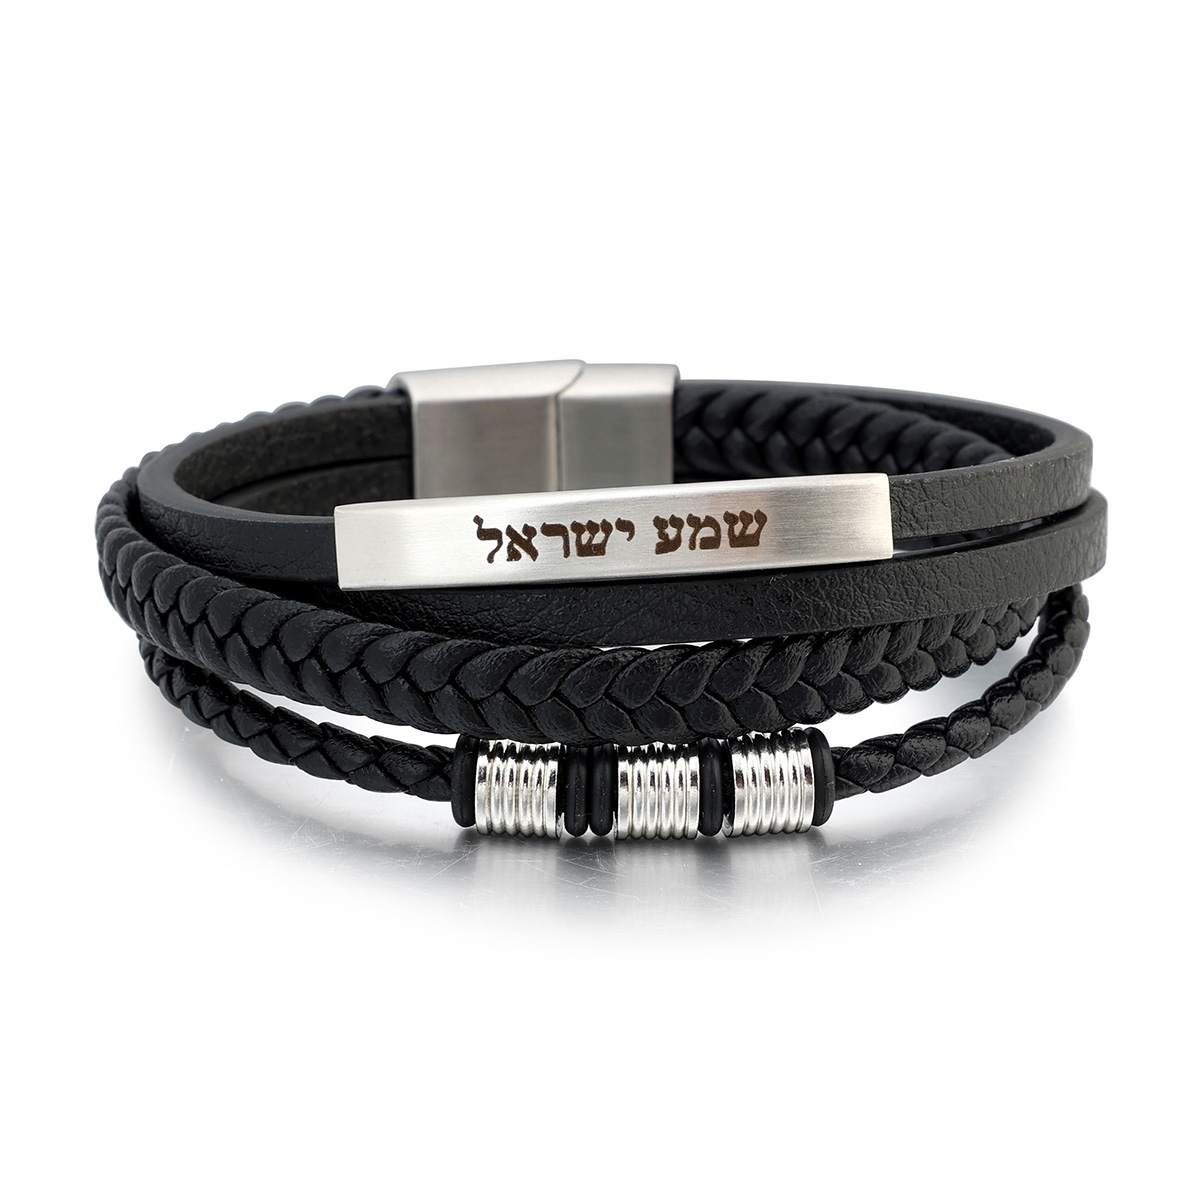 Men's Shema Yisrael 3-Band Beaded Leather Bracelet with Magnetic Clasp -  Blue and Black